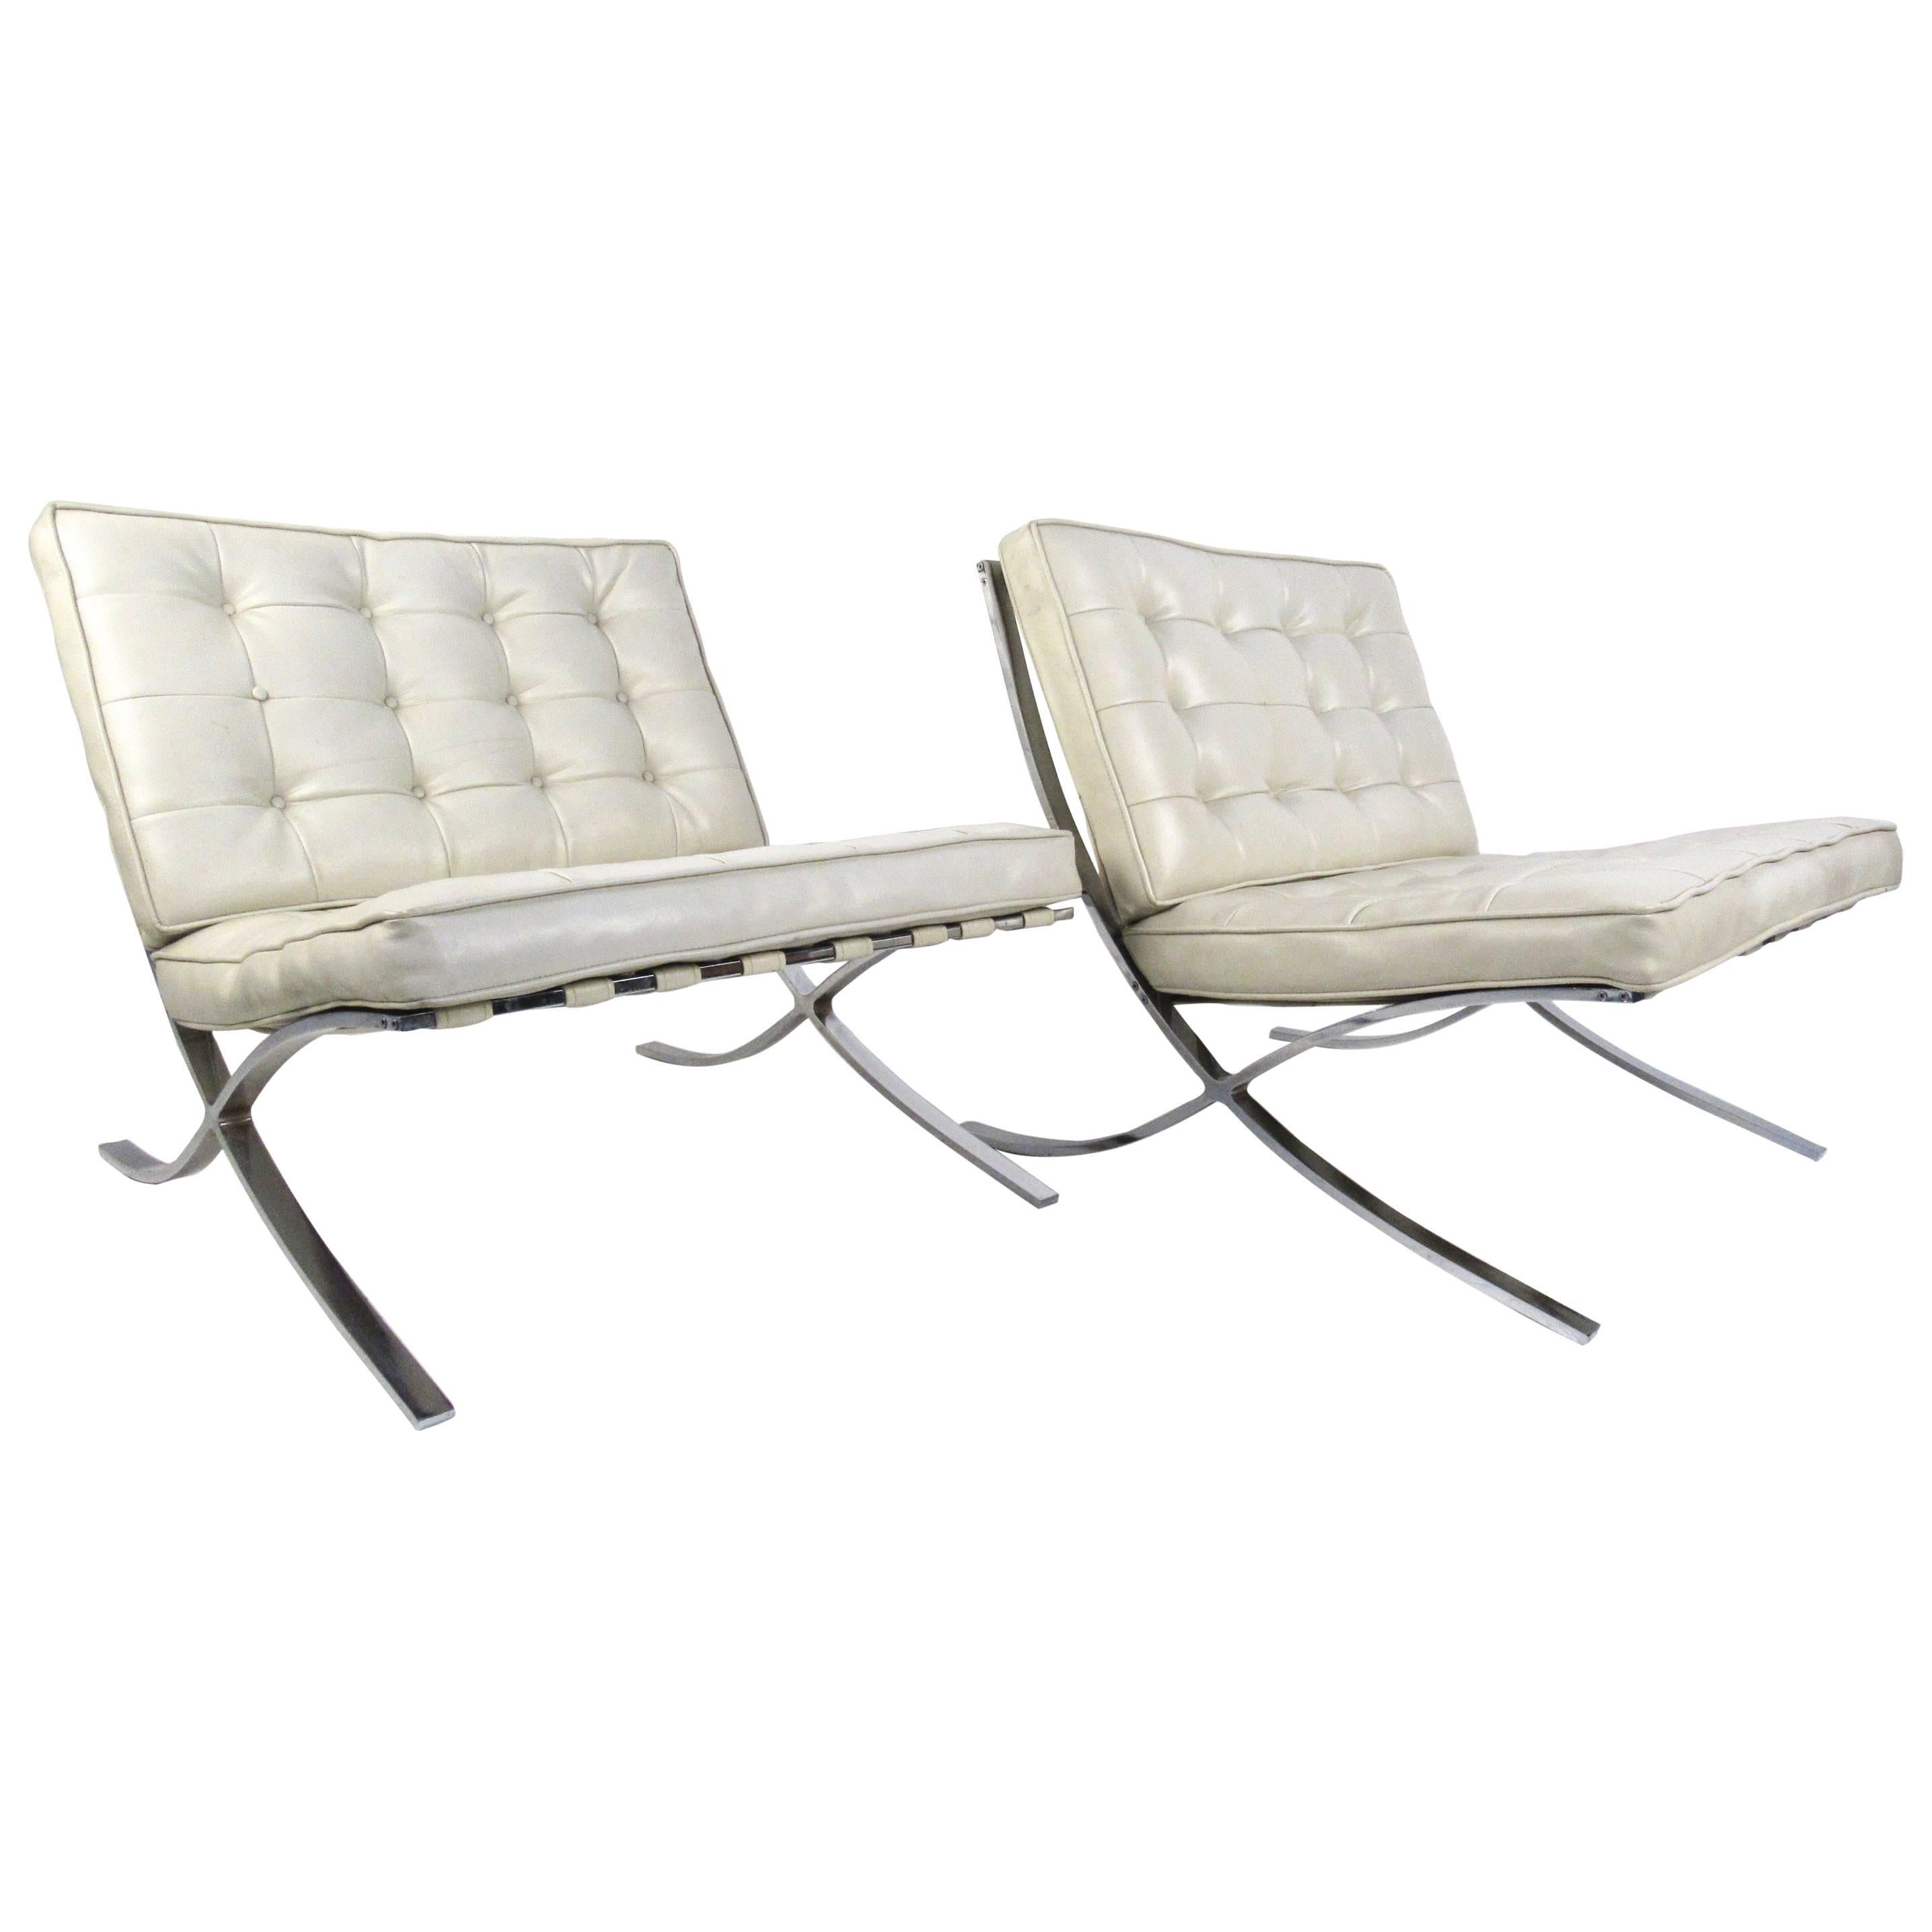 Pair of Mid-Century Modern Barcelona Style Lounge Chairs